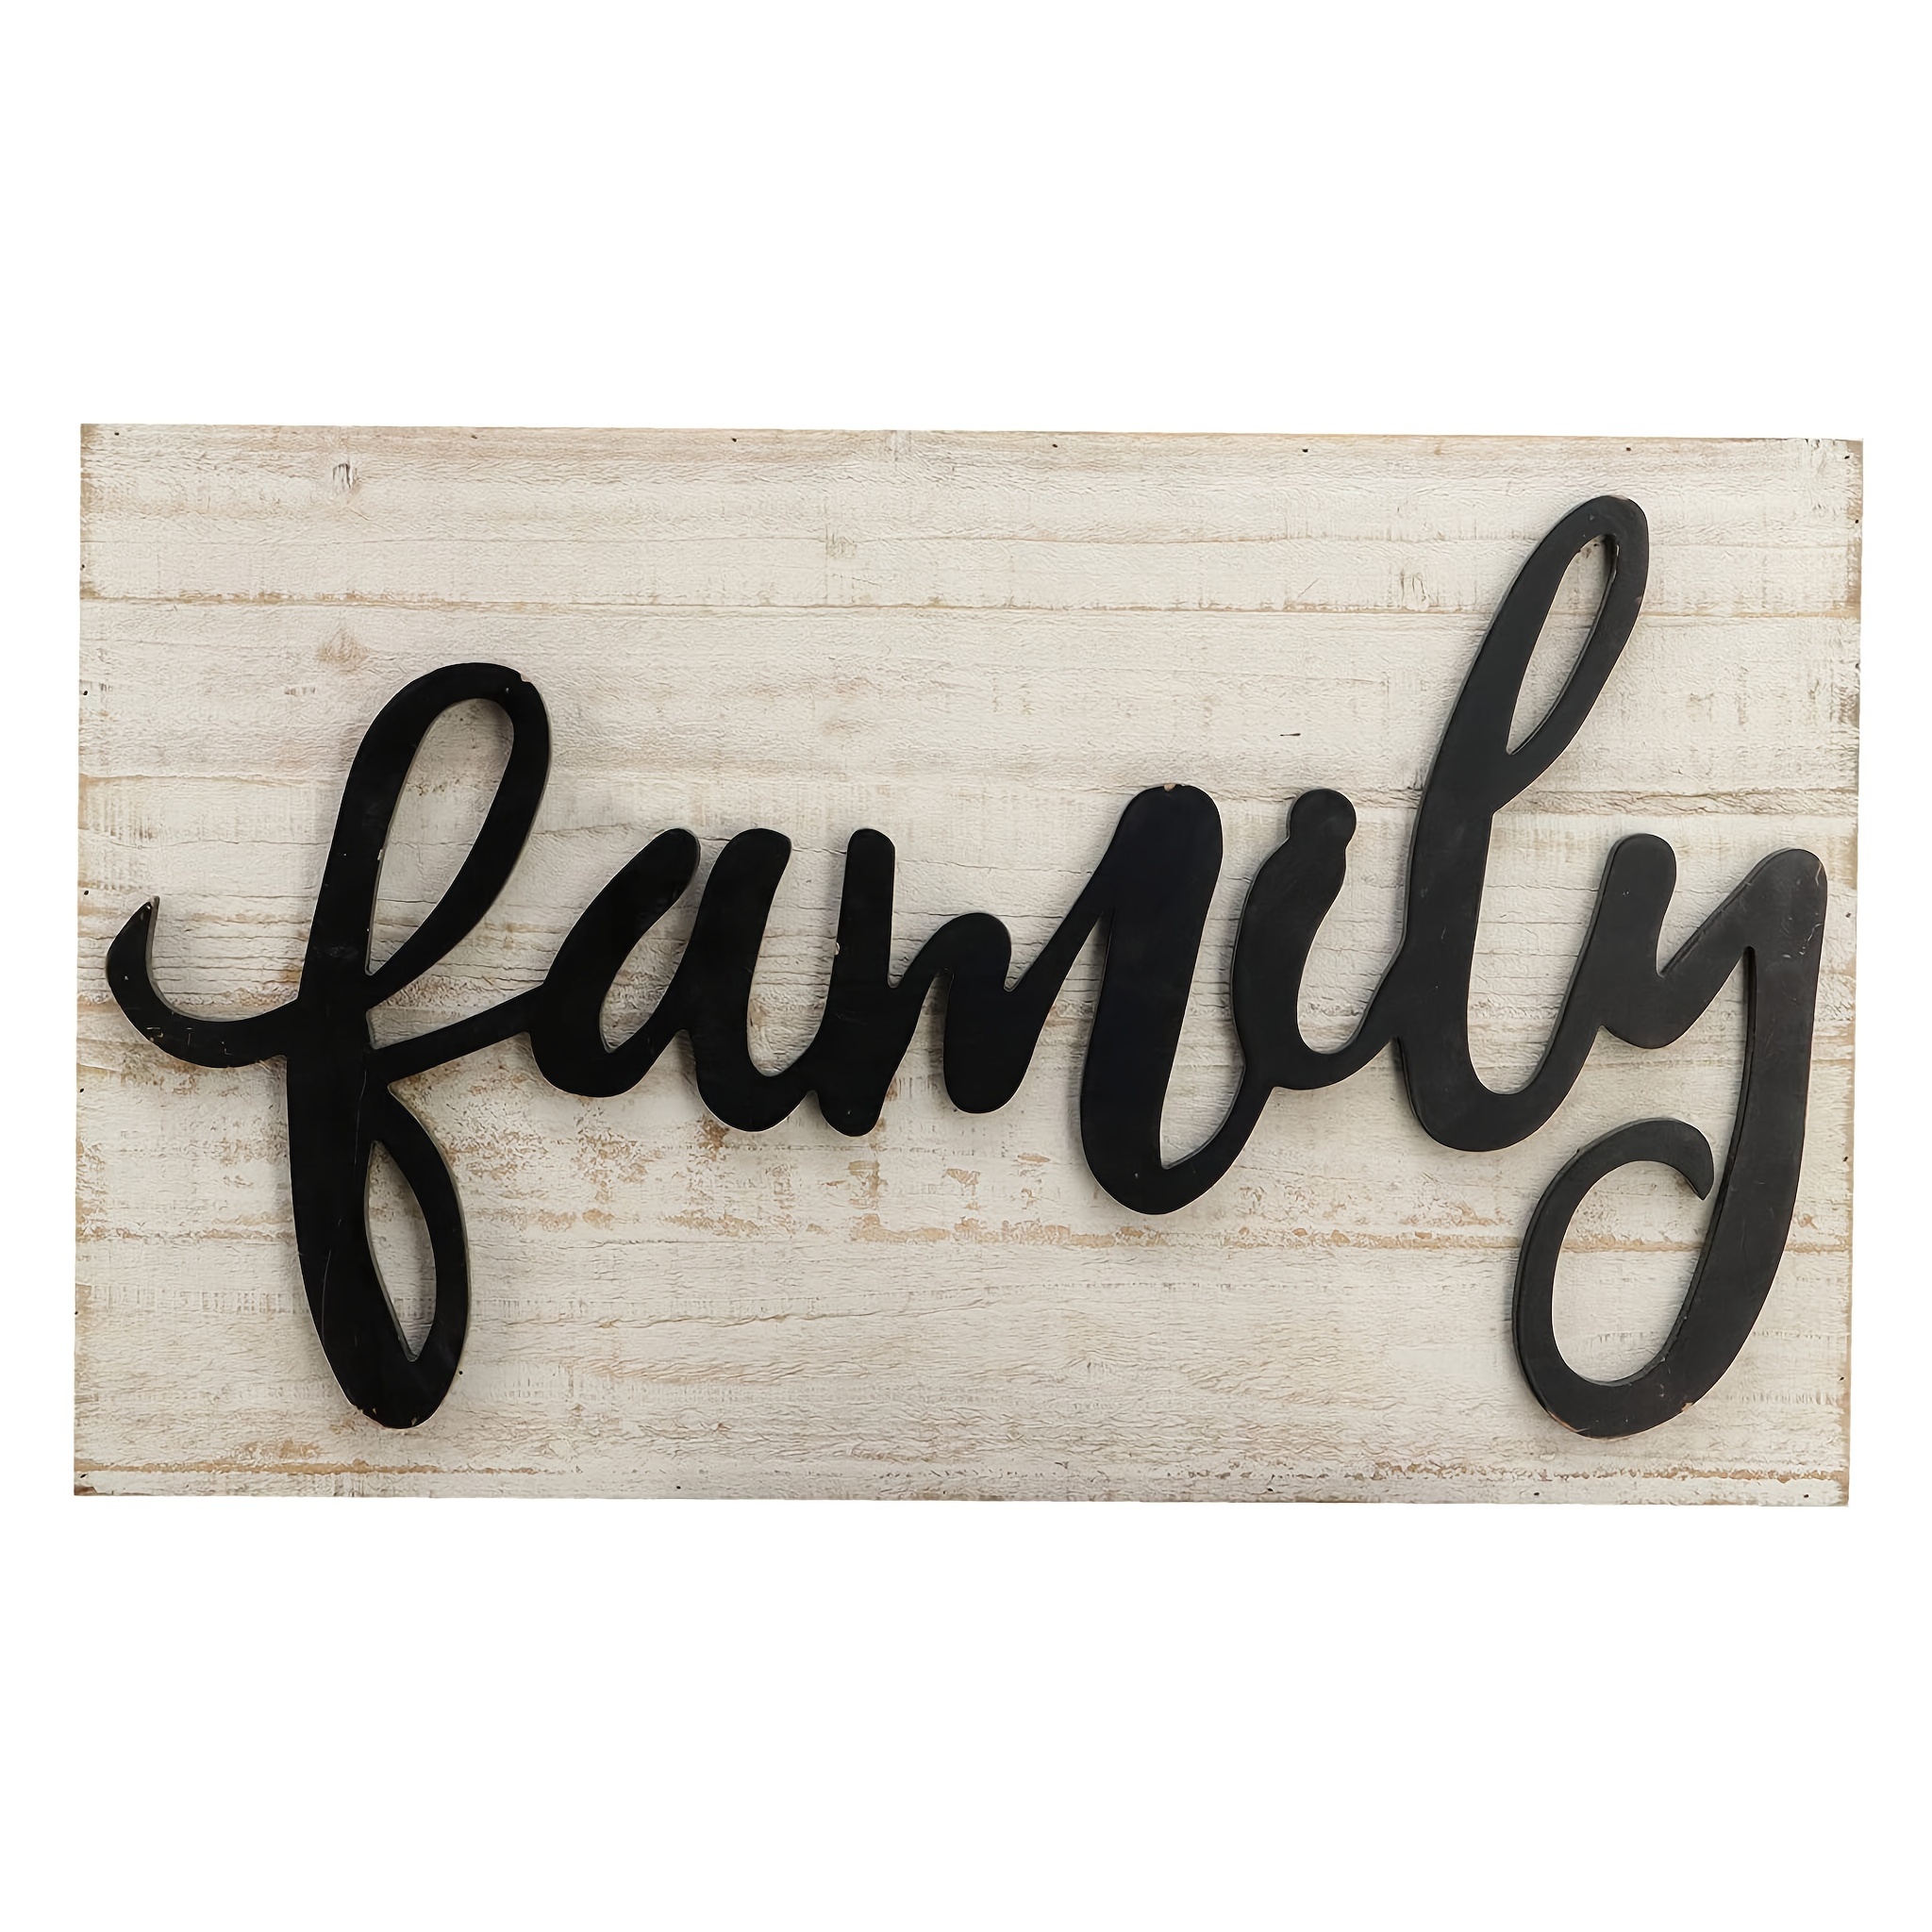 

Family Wood Signs For Home Decor, Rustic Farmhouse Family Decor White Washed Finishing Background And 3d Black Lettering